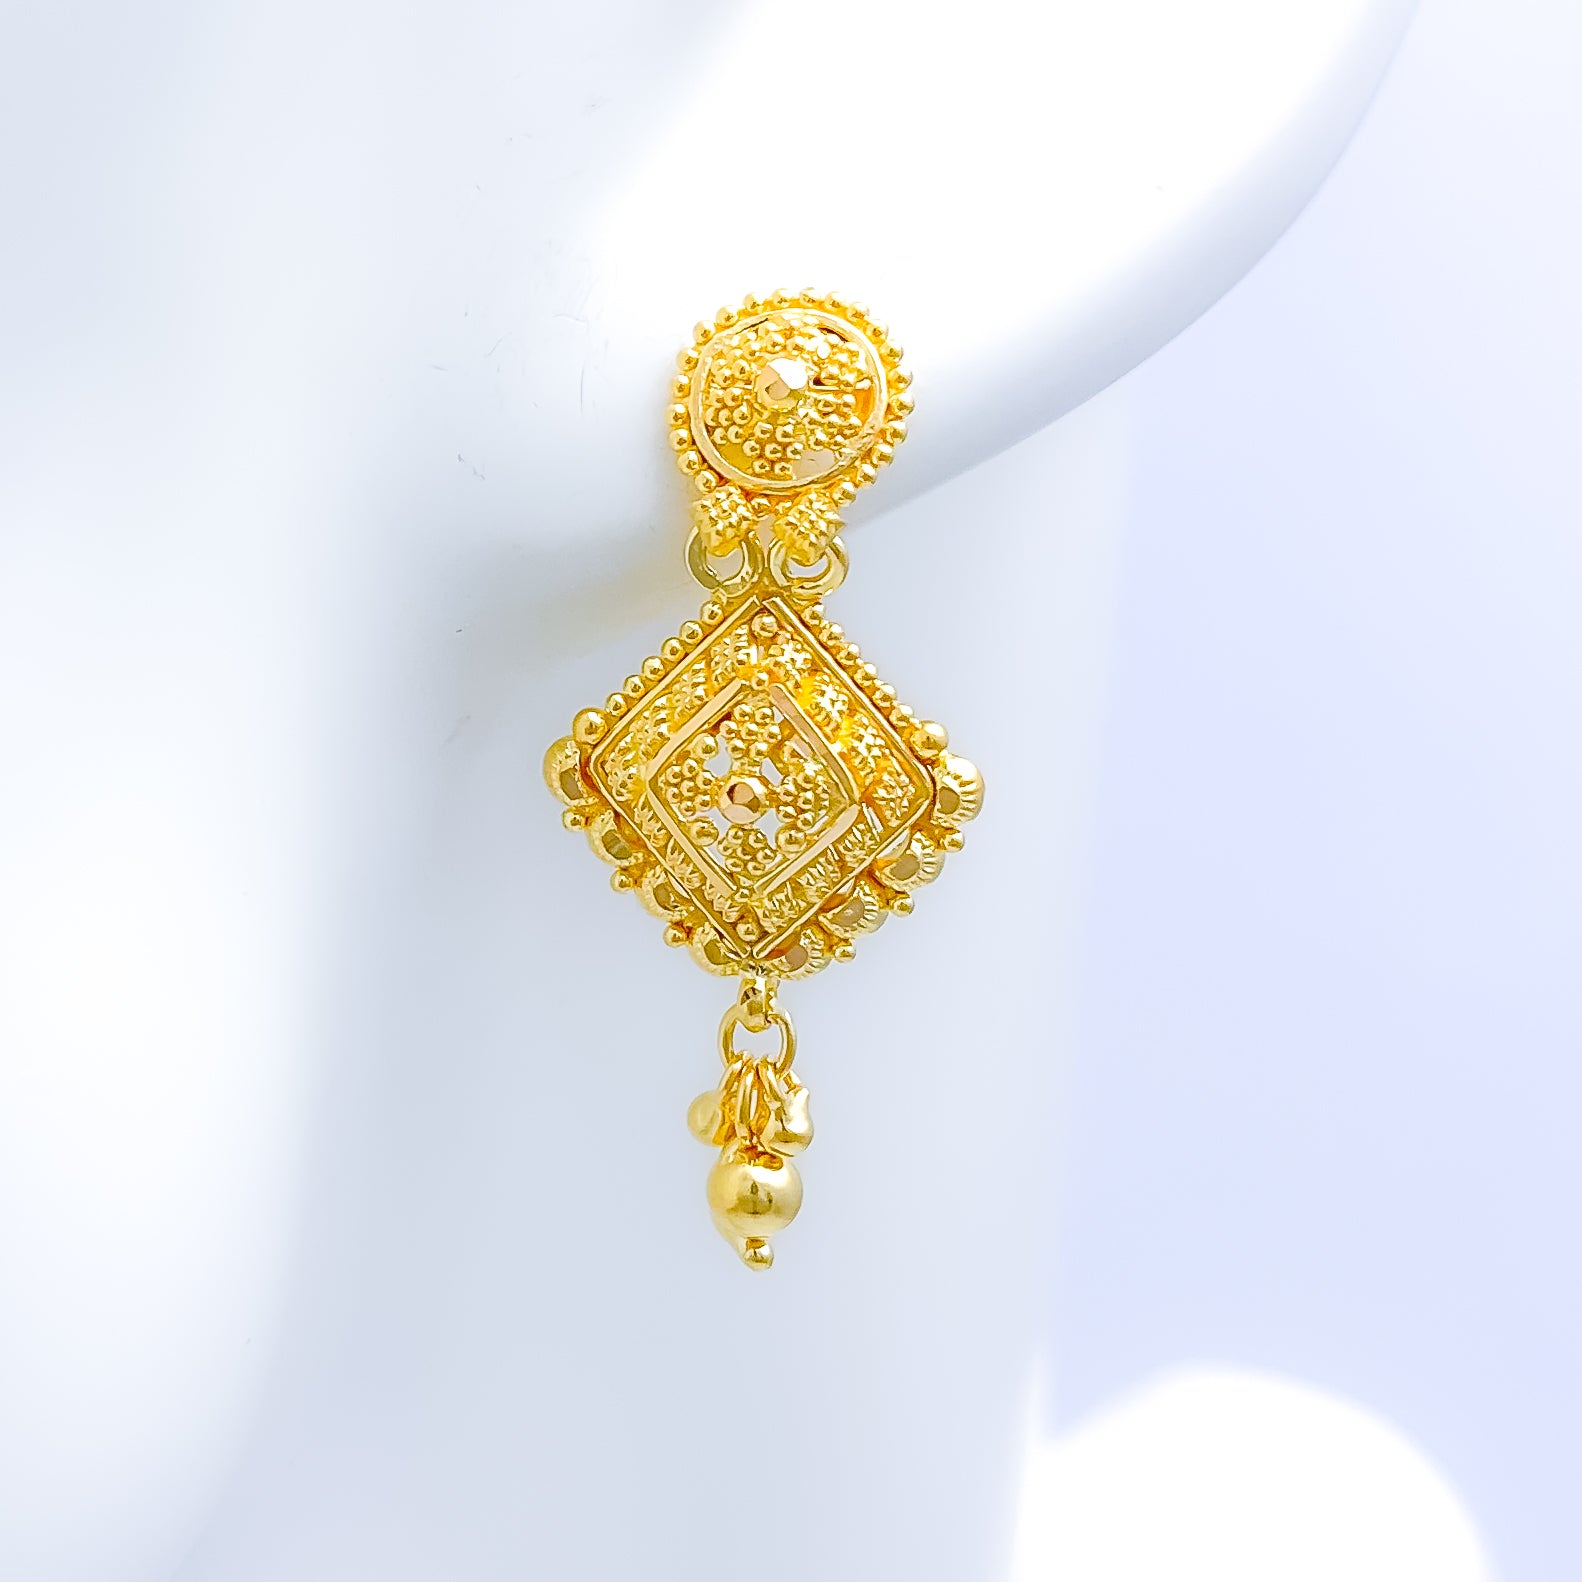 6 Best Lightweight Gold Earrings Design with Price - People choice